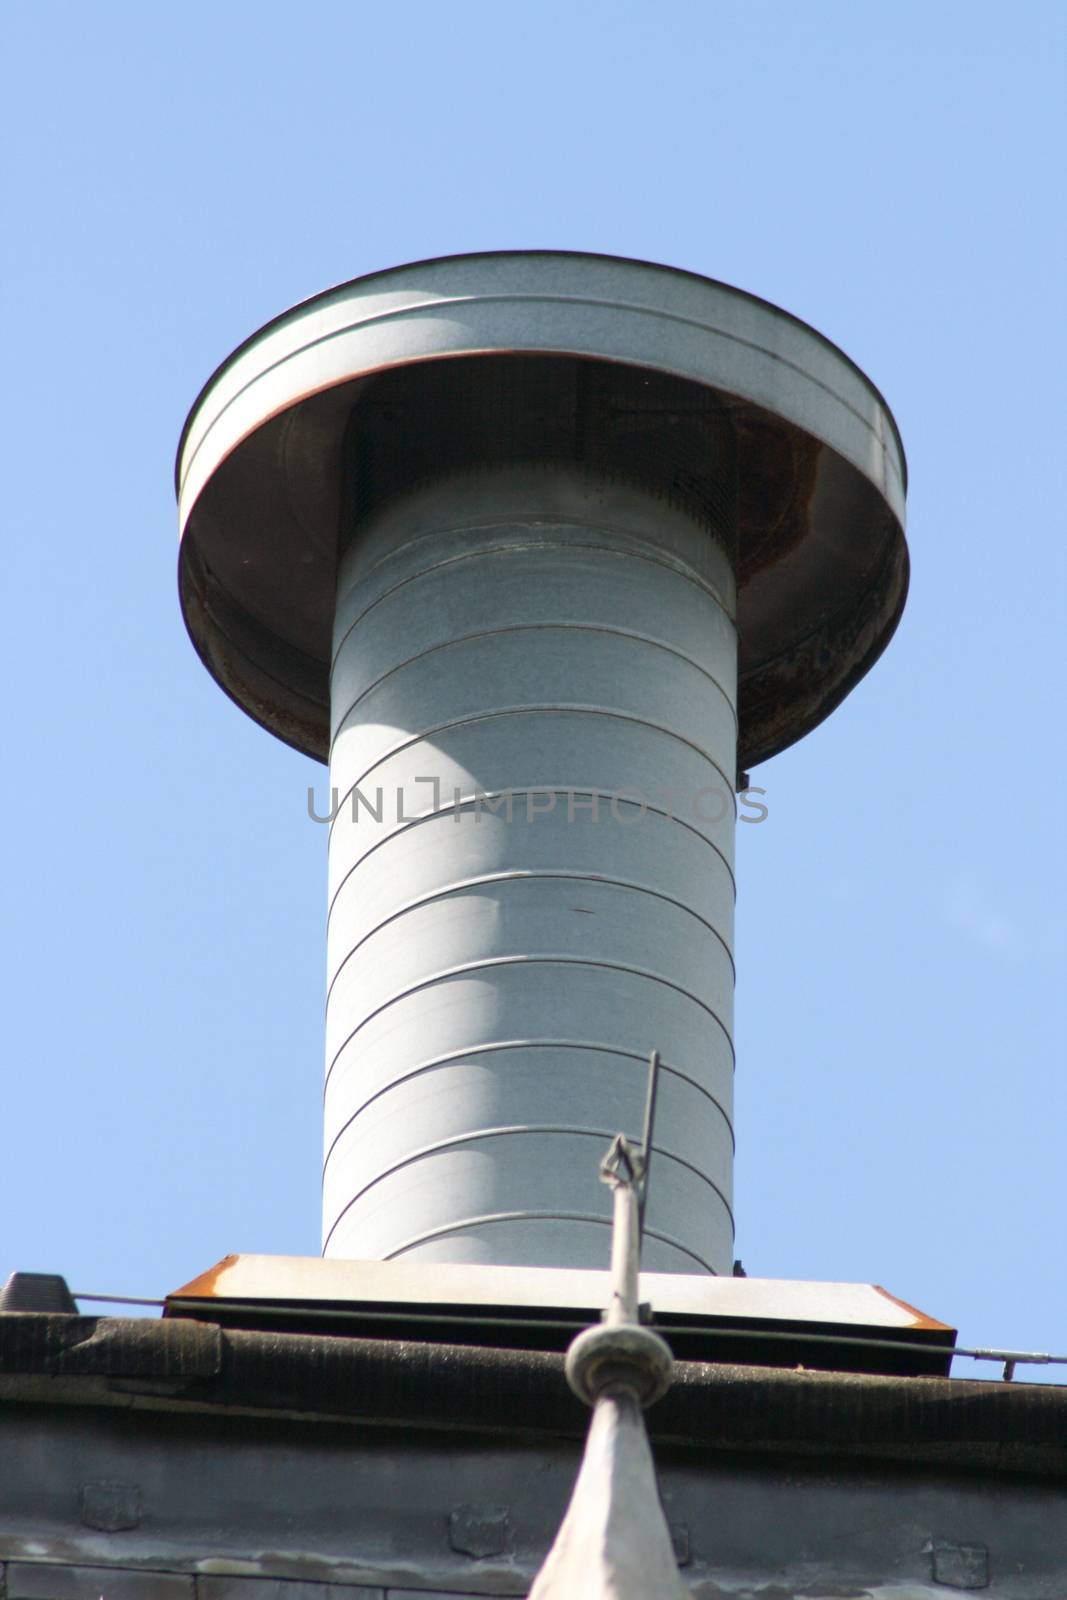 Vent pipe with cover, on top of a building